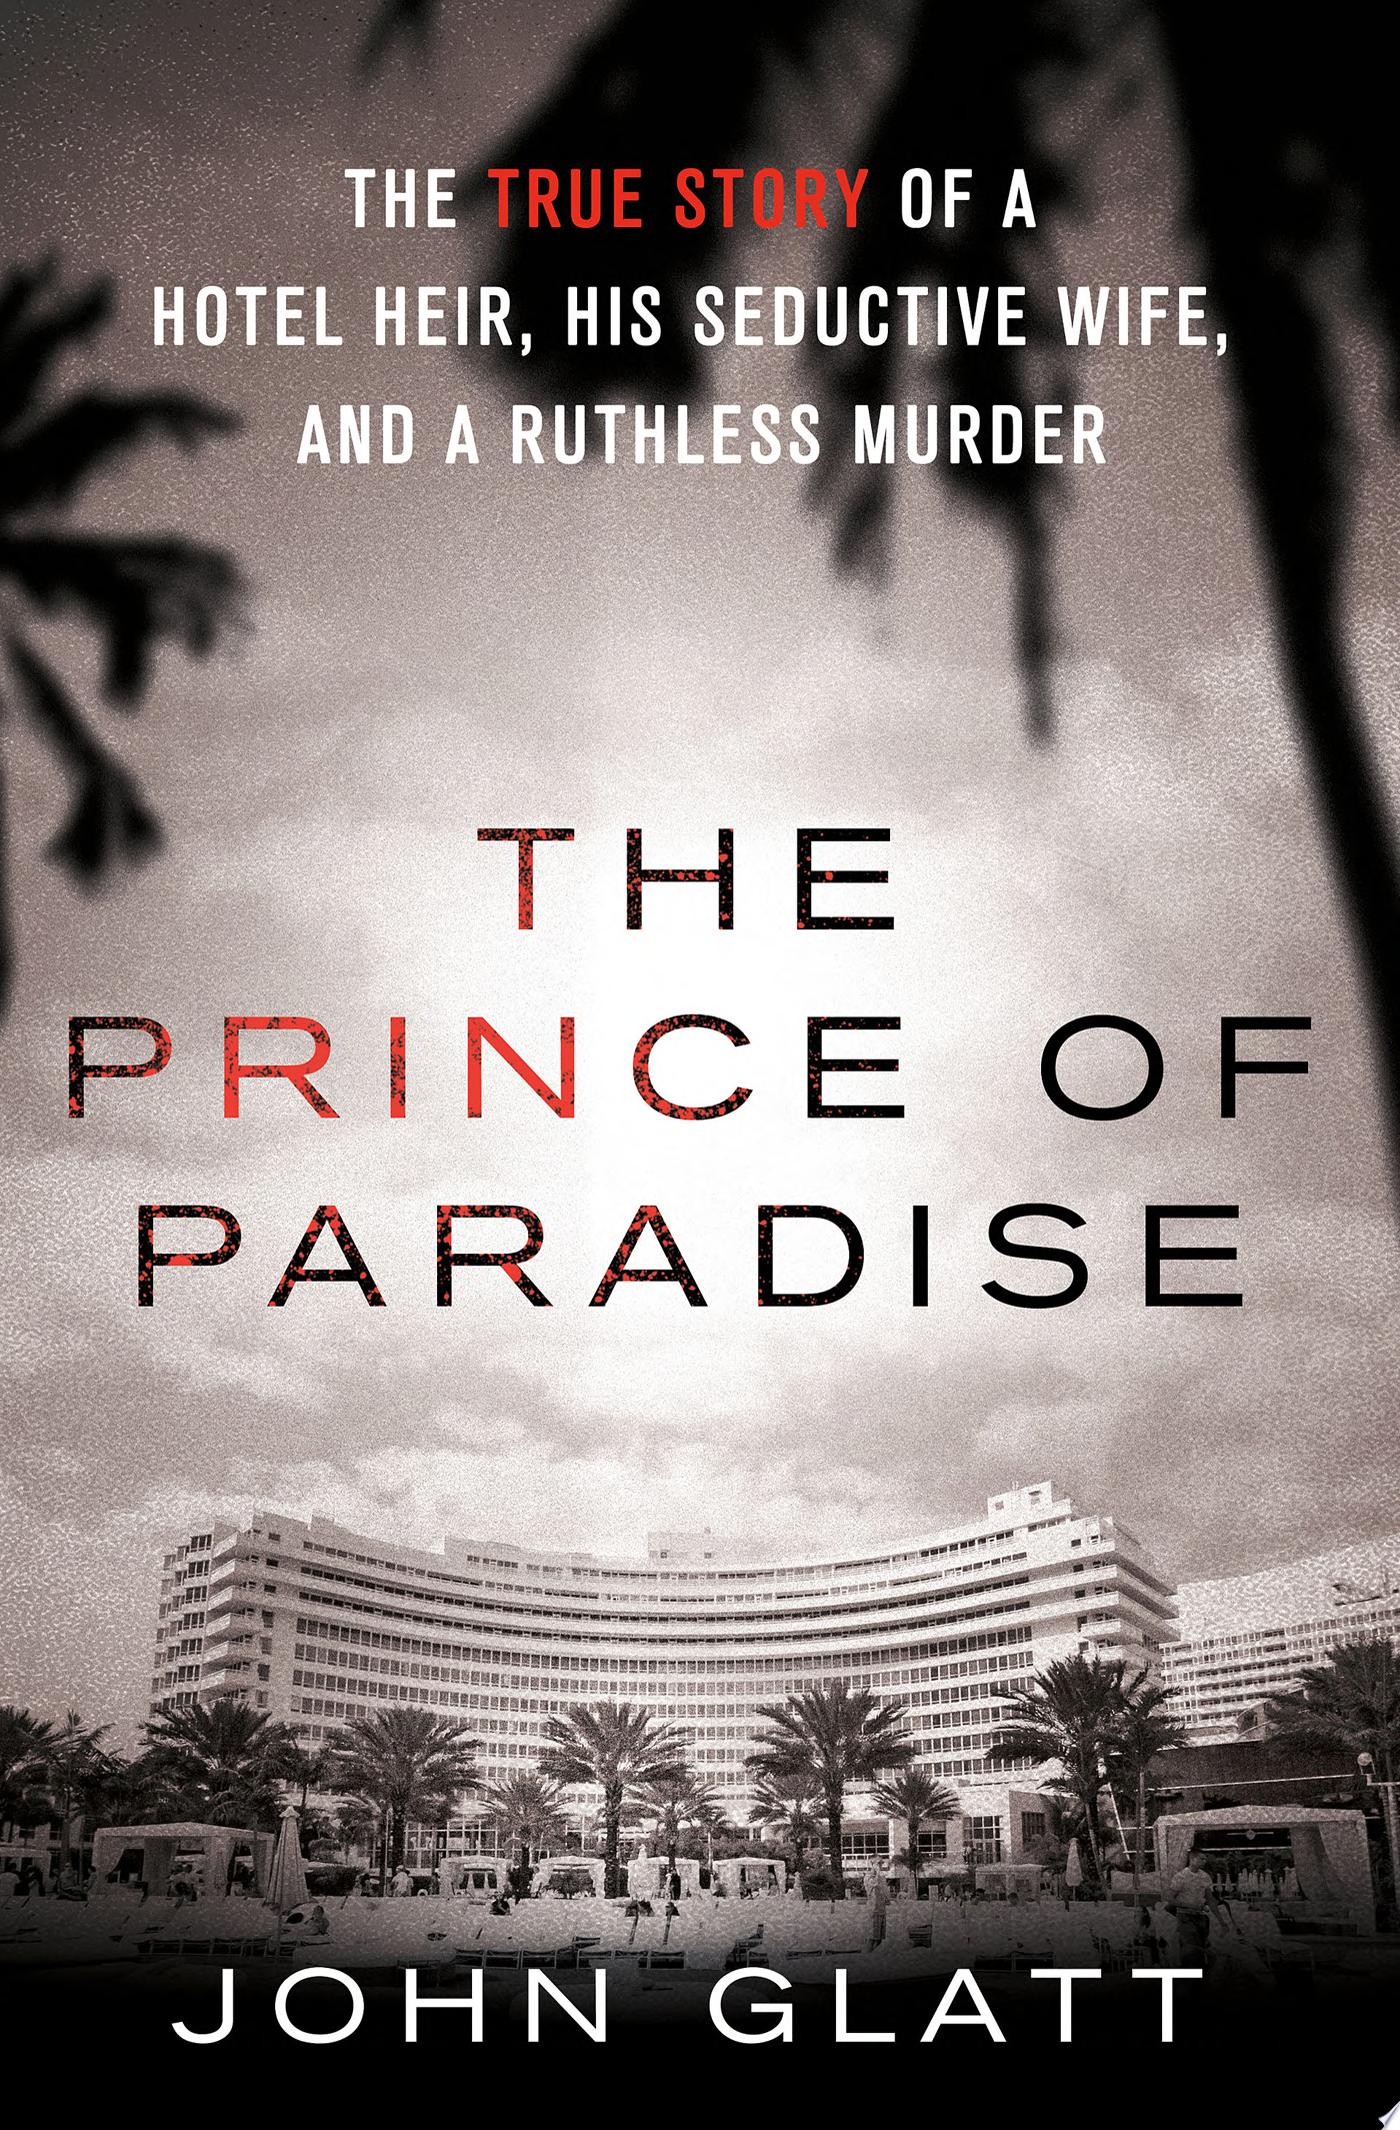 Image for "The Prince of Paradise"